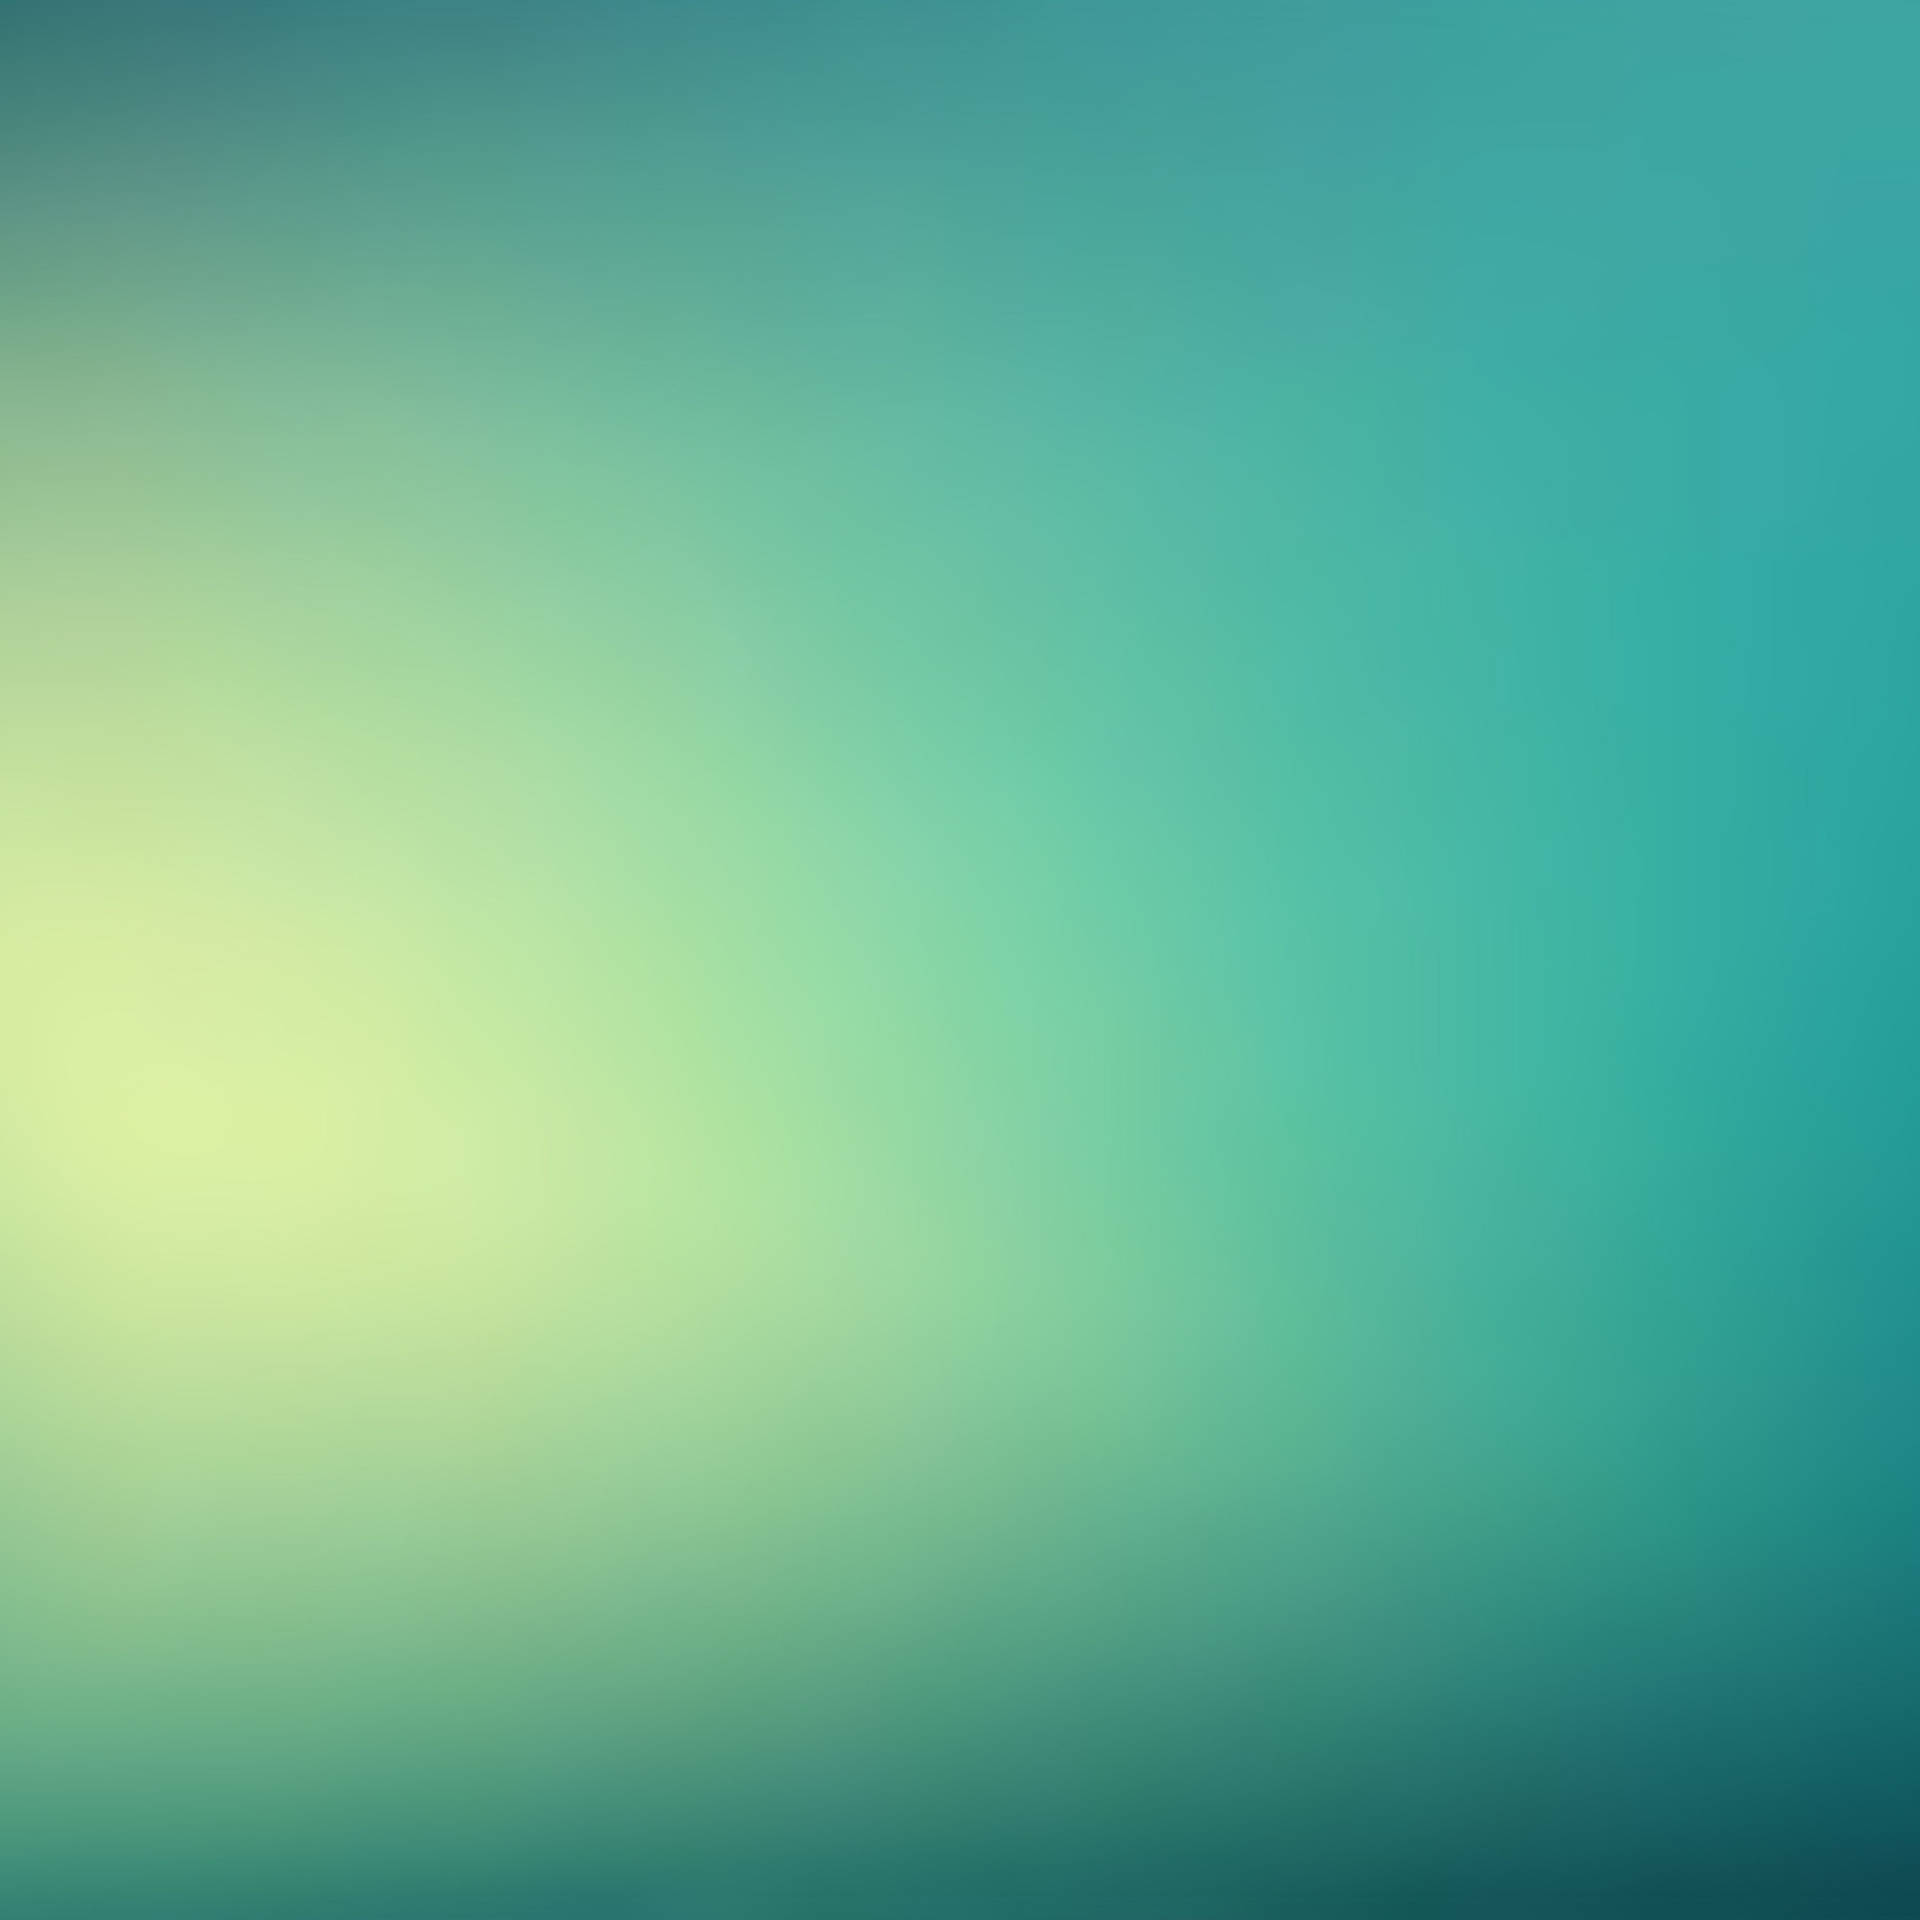 A Blurred Background With A Blue And Green Color Wallpaper